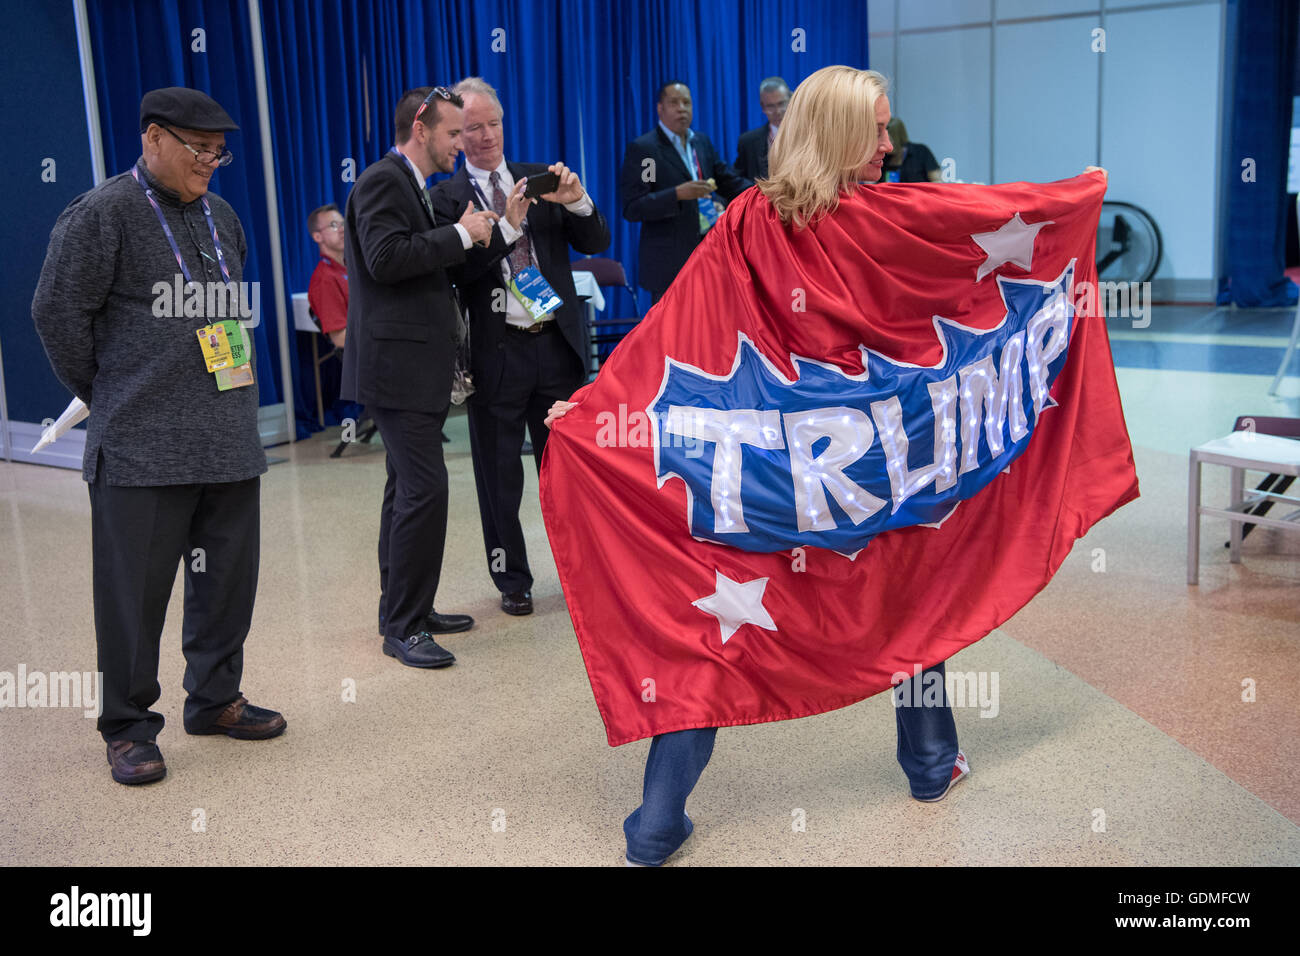 Cleveland, Ohio, USA . 19th July, 2016. A GOP delegate wears a Trump cape during the second day of the Republican National Convention July 19, 2016 in Cleveland, Ohio. Earlier in the day the delegates formally nominated Donald J. Trump for president. Credit:  Planetpix/Alamy Live News Stock Photo